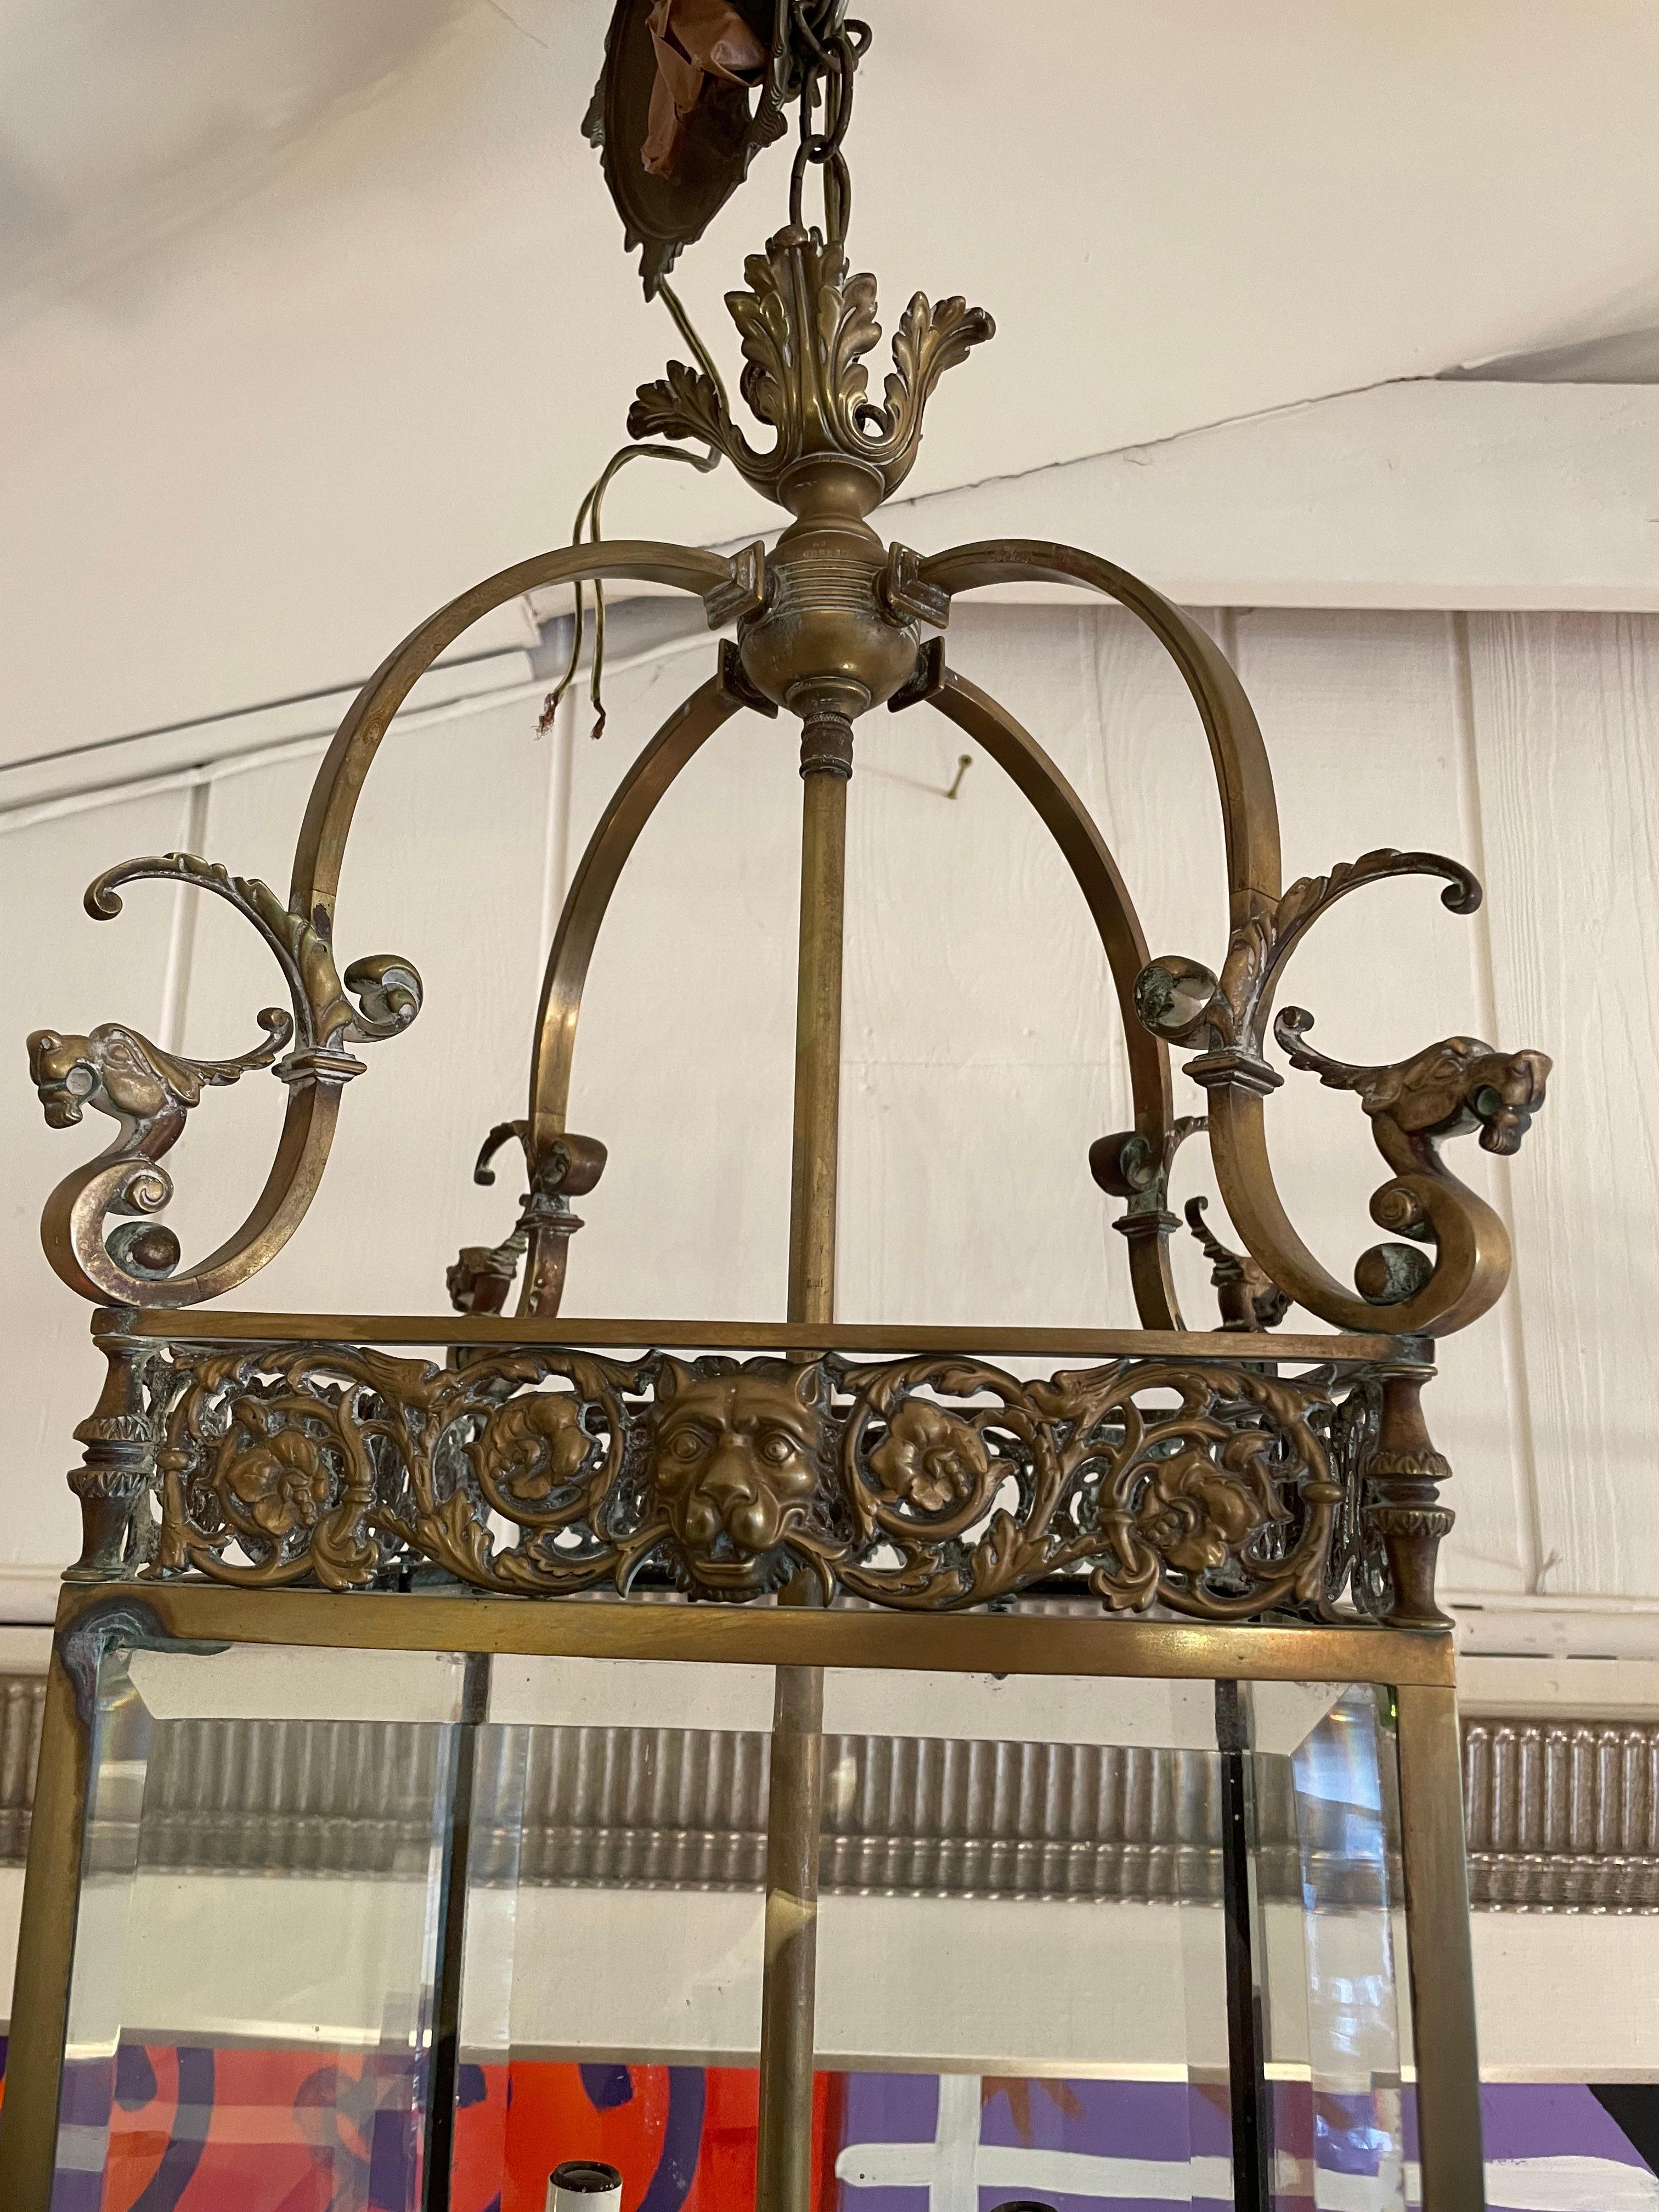 Magnificent English bronze and bevelled glass lantern having wonderful details such as lion heads and griffins.  6